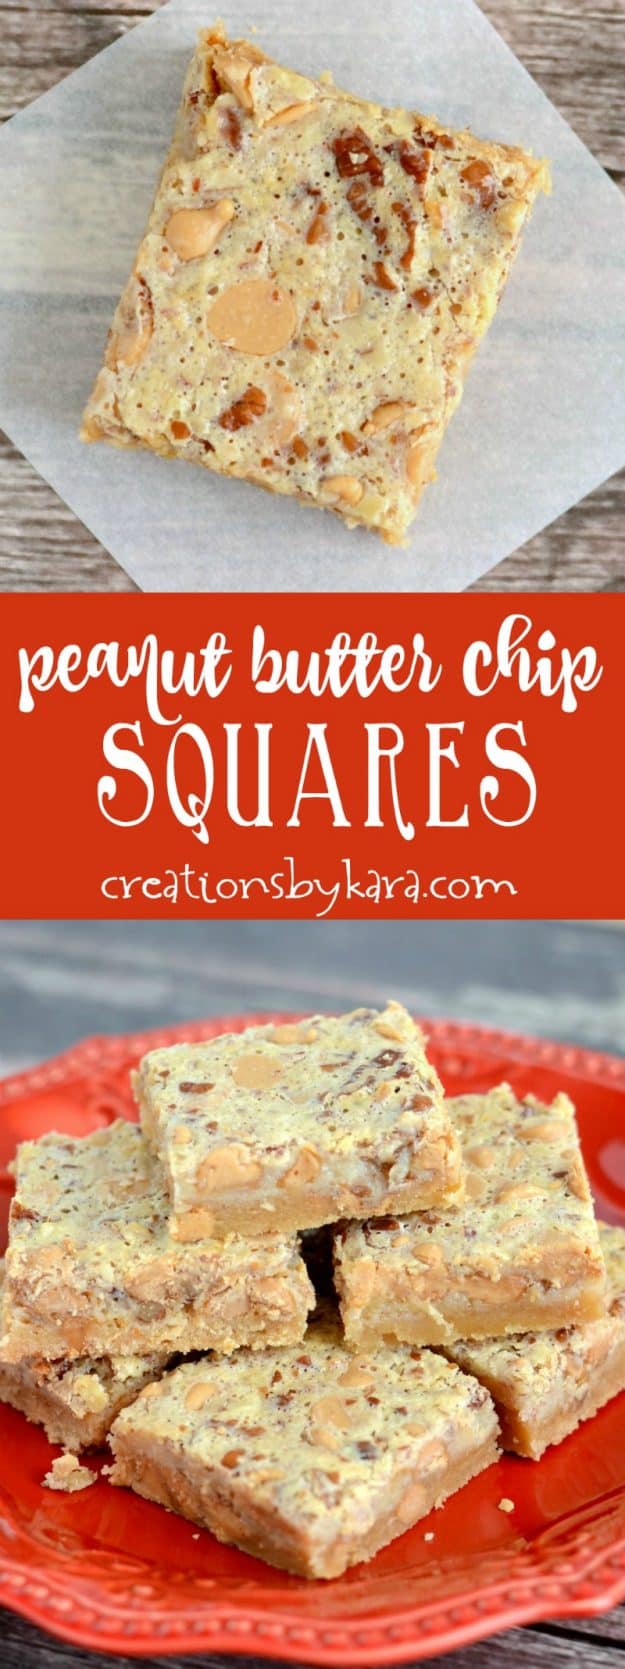  Peanut Butter Chip Squares COLLAGE